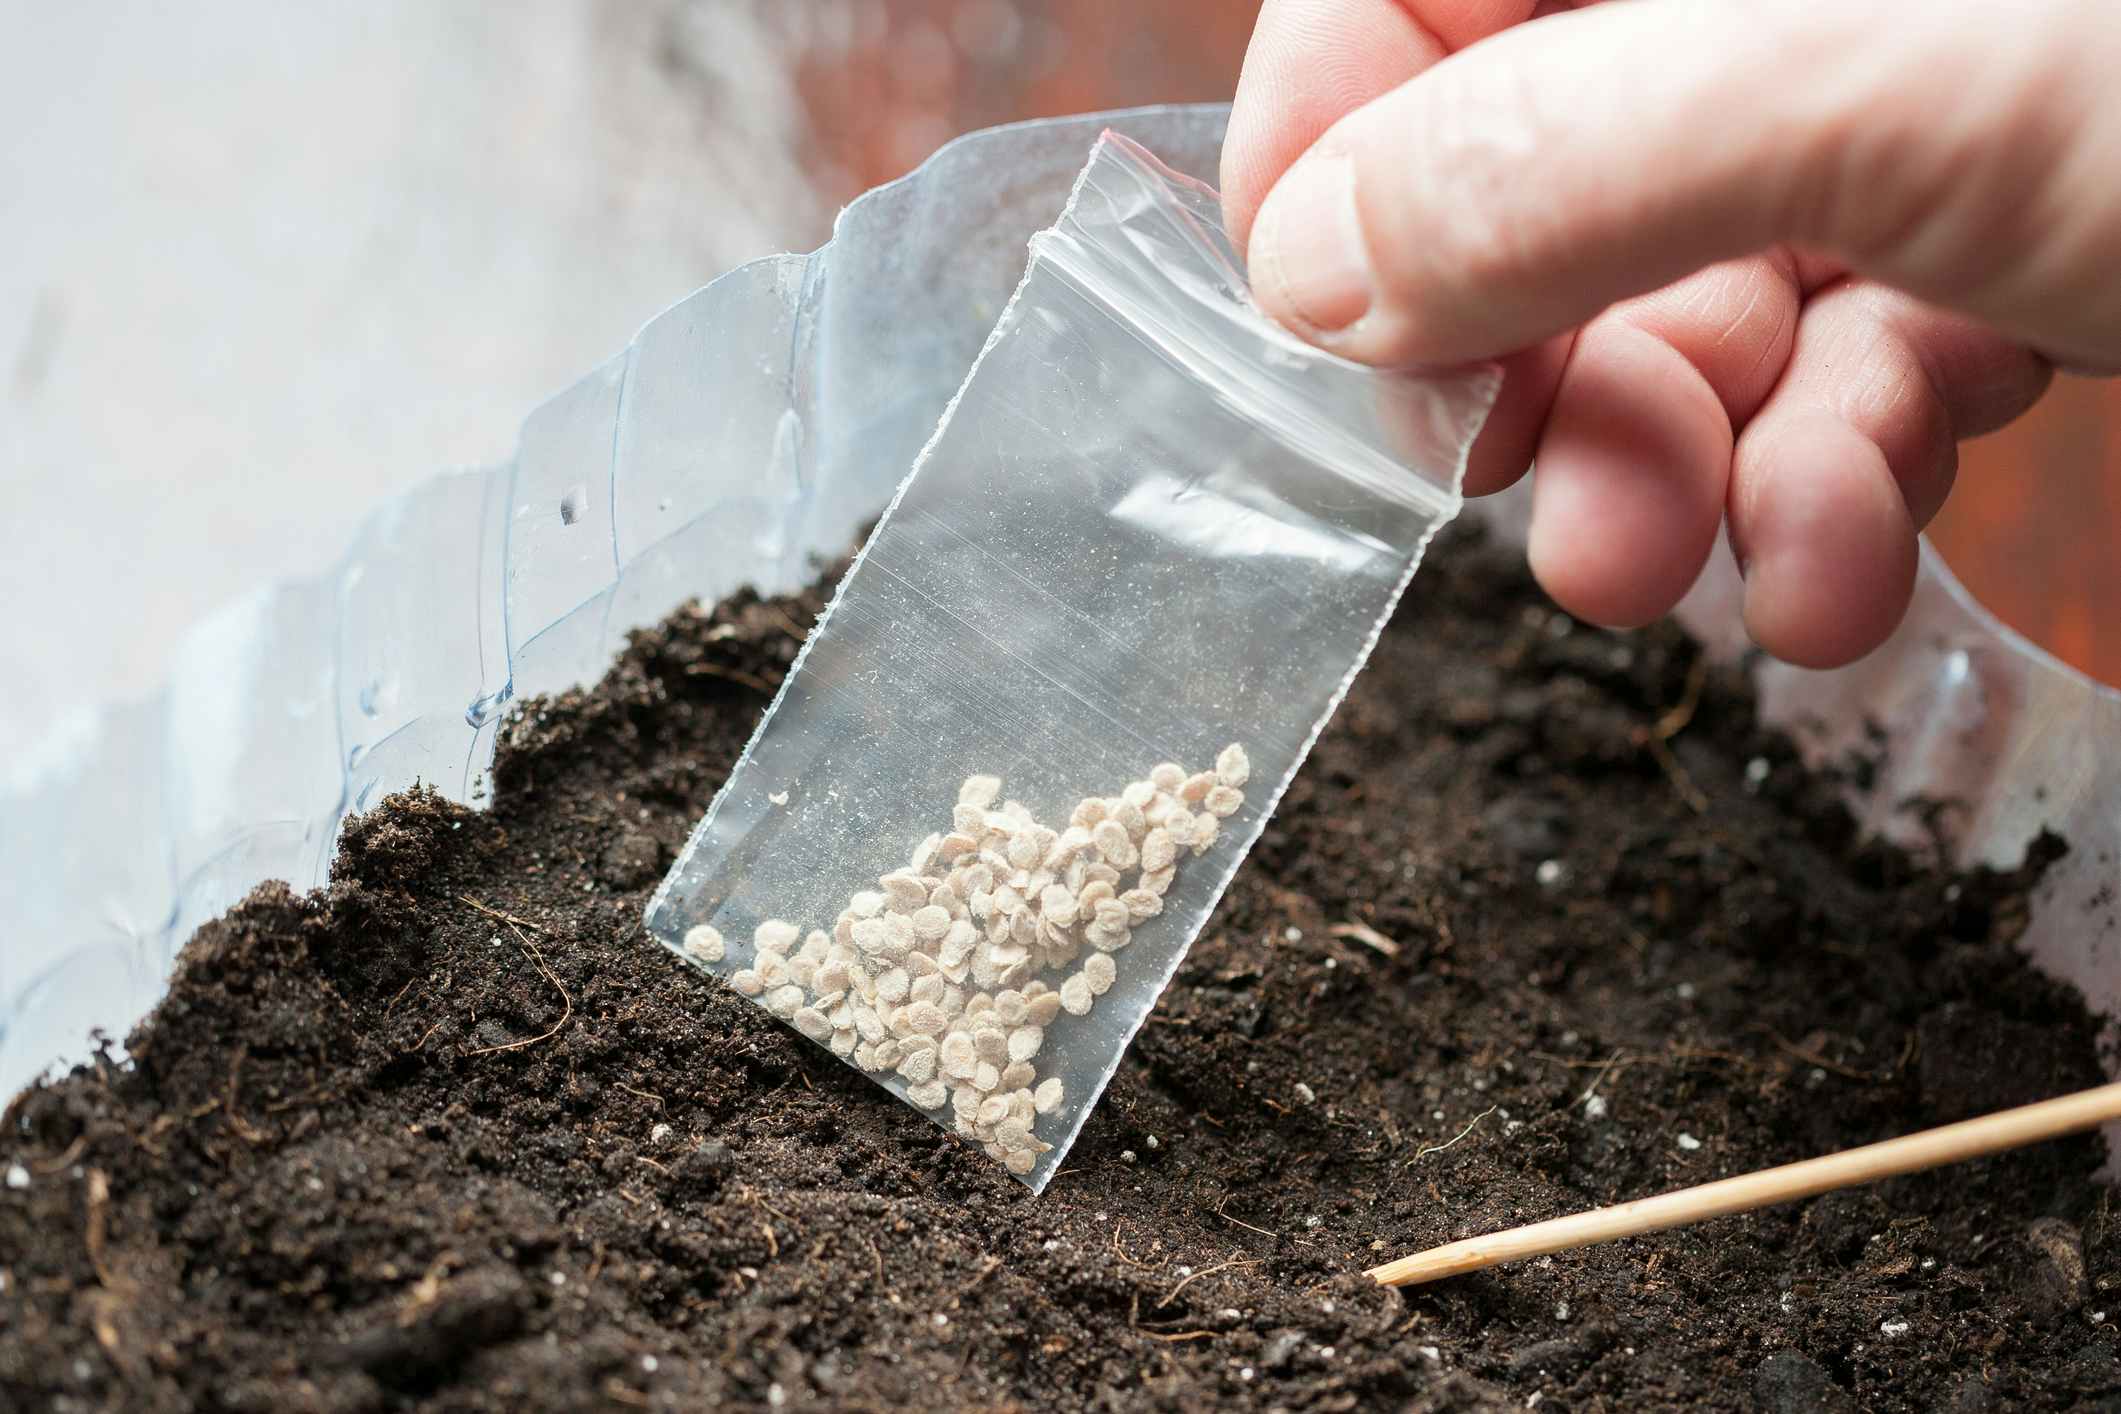 A person's hand holding a small bag of seeds above a container of soil.